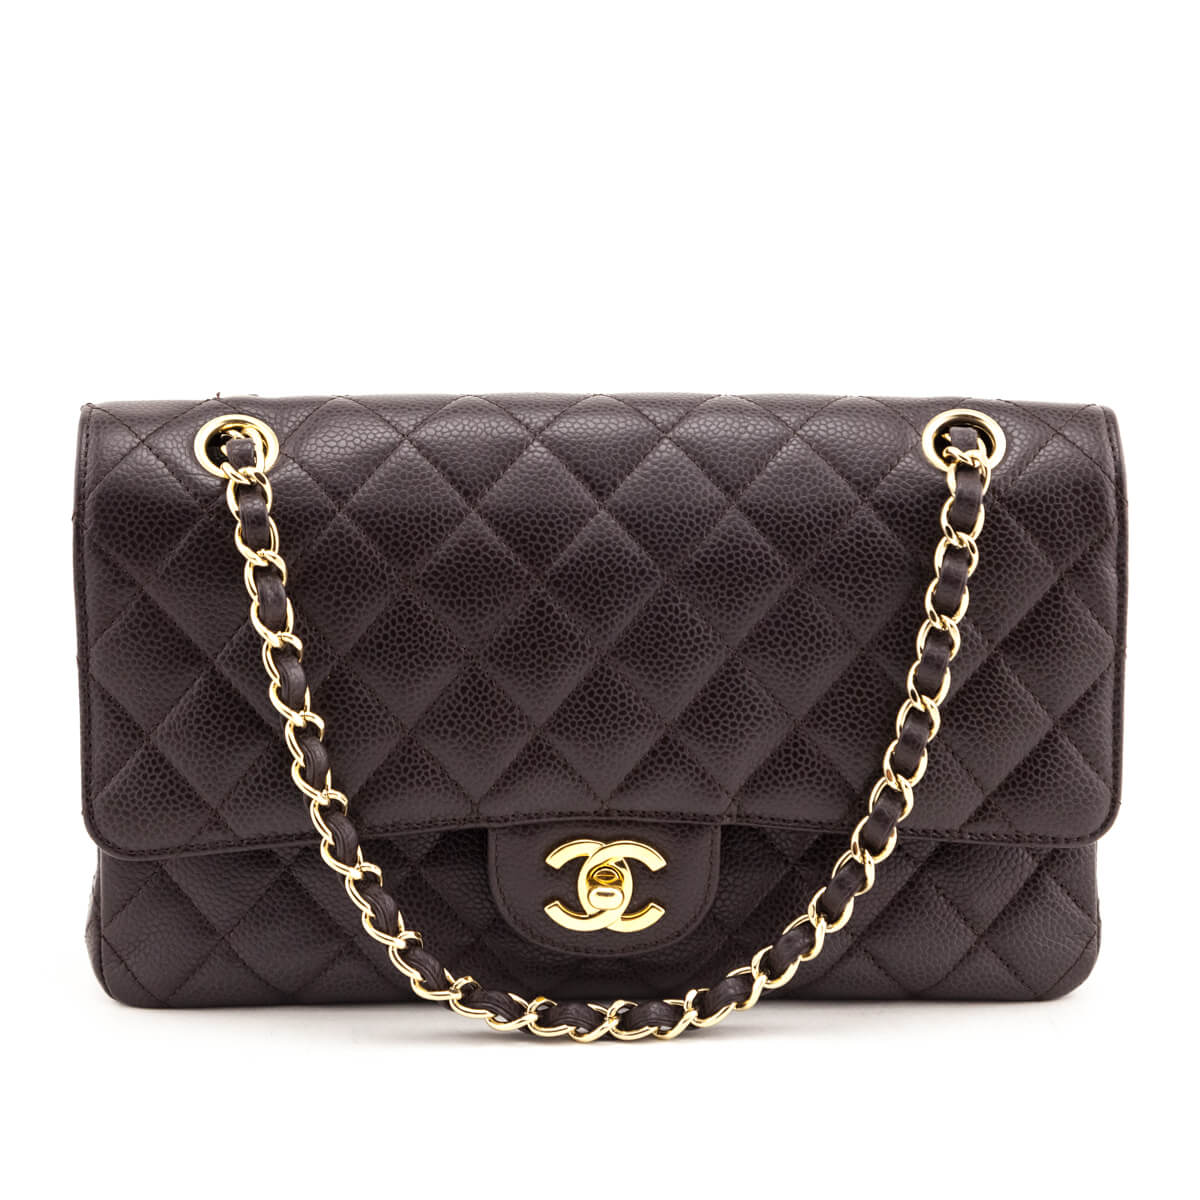 Chanel Brown Caviar Medium Double Flap Bag - Love that Bag etc - Preowned Authentic Designer Handbags & Preloved Fashions